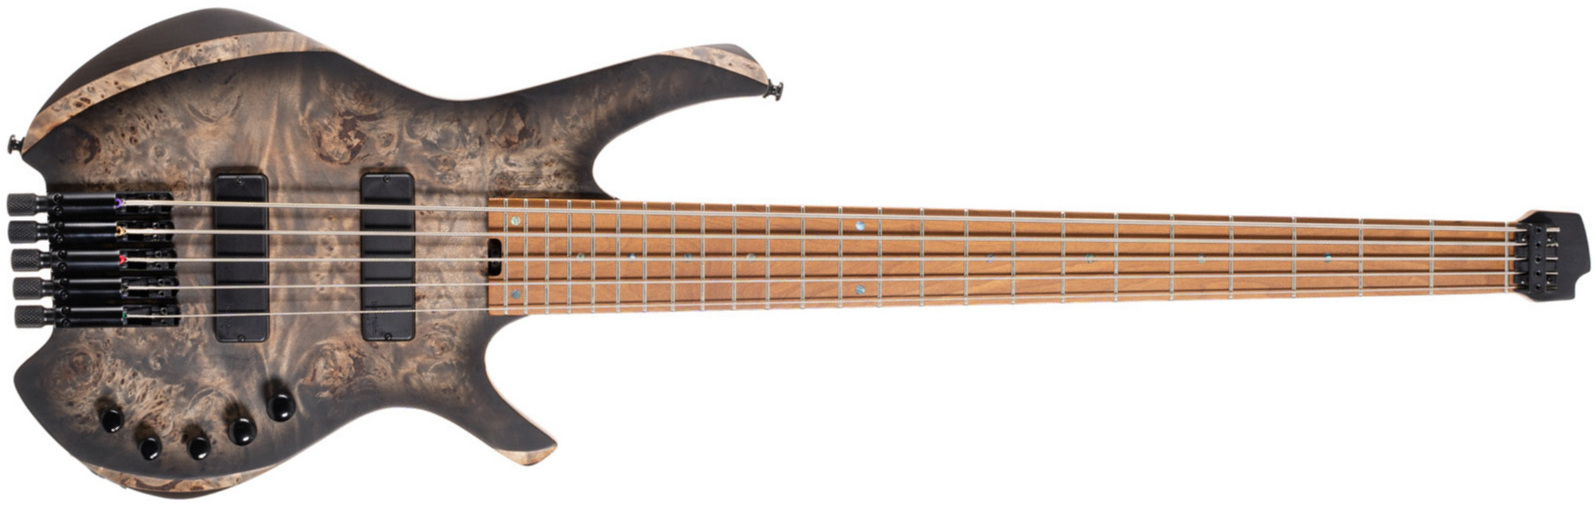 Cort Space 5 5-cordes Bartolini Mn - Star Dust Black - Solid body electric bass - Main picture